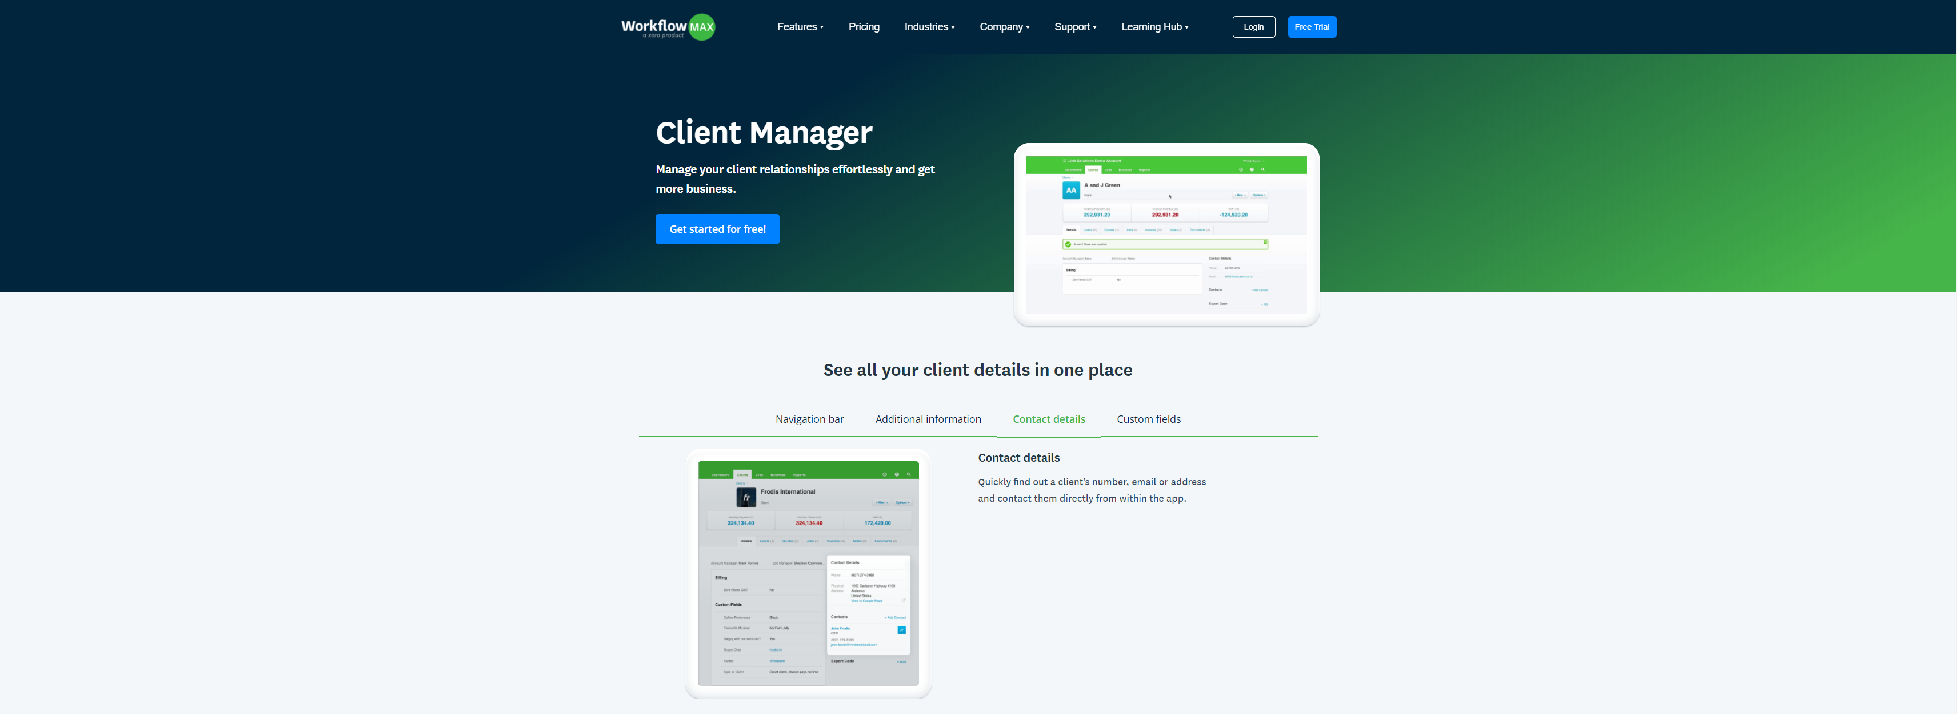 Top 11 Best Client Management Software for Small Business - 2022